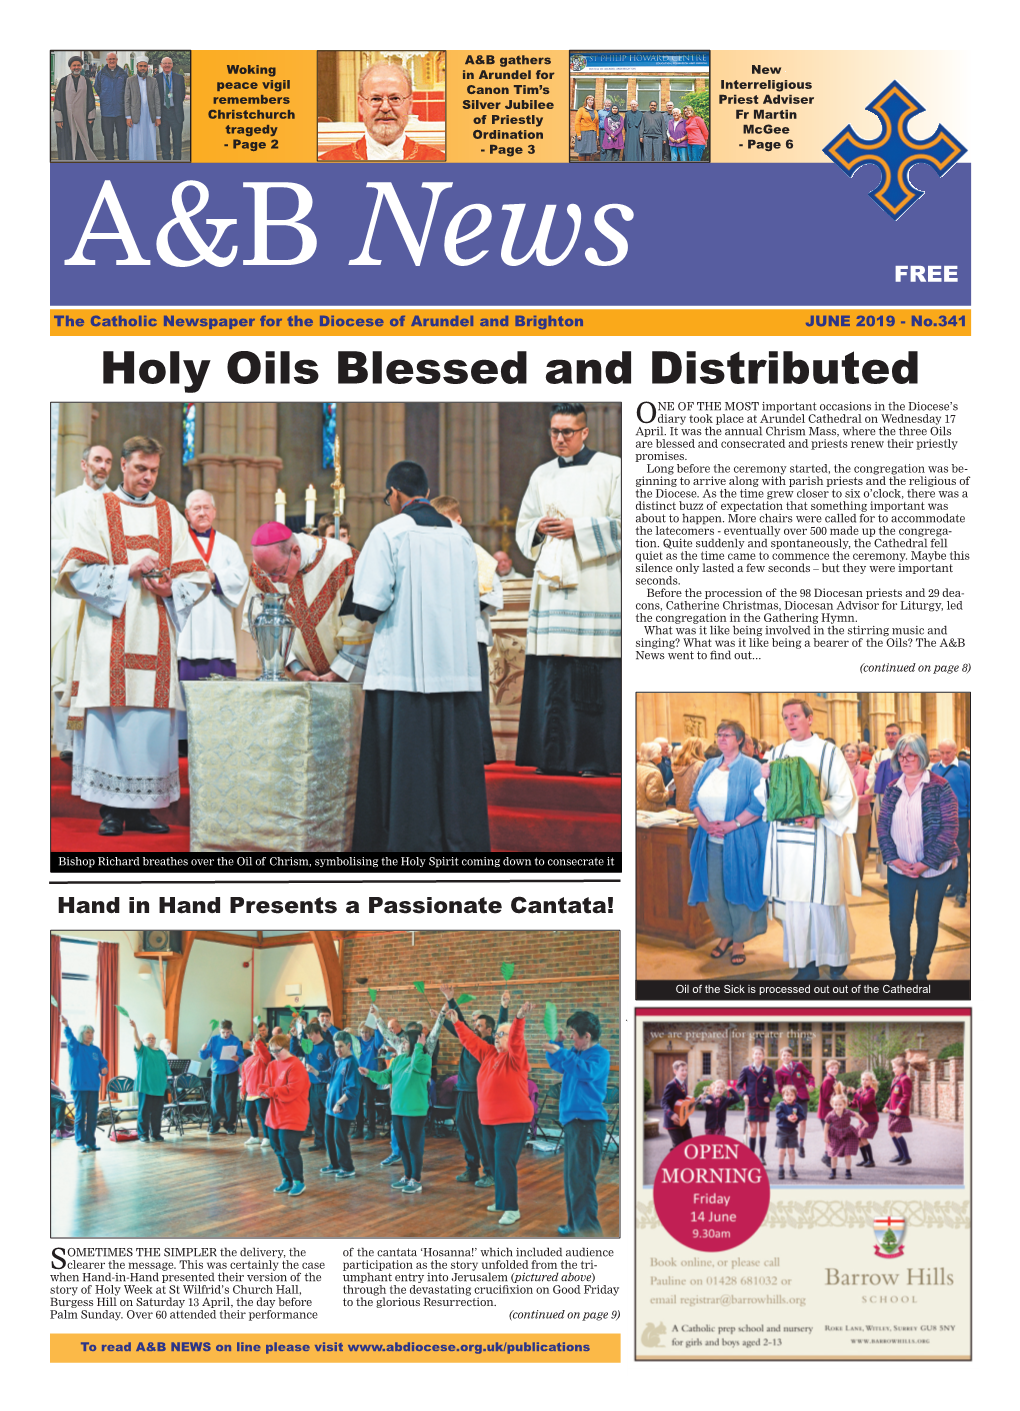 Holy Oils Blessed and Distributed NE of the MOST Important Occasions in the Diocese’S Odiary Took Place at Arundel Cathedral on Wednesday 17 April